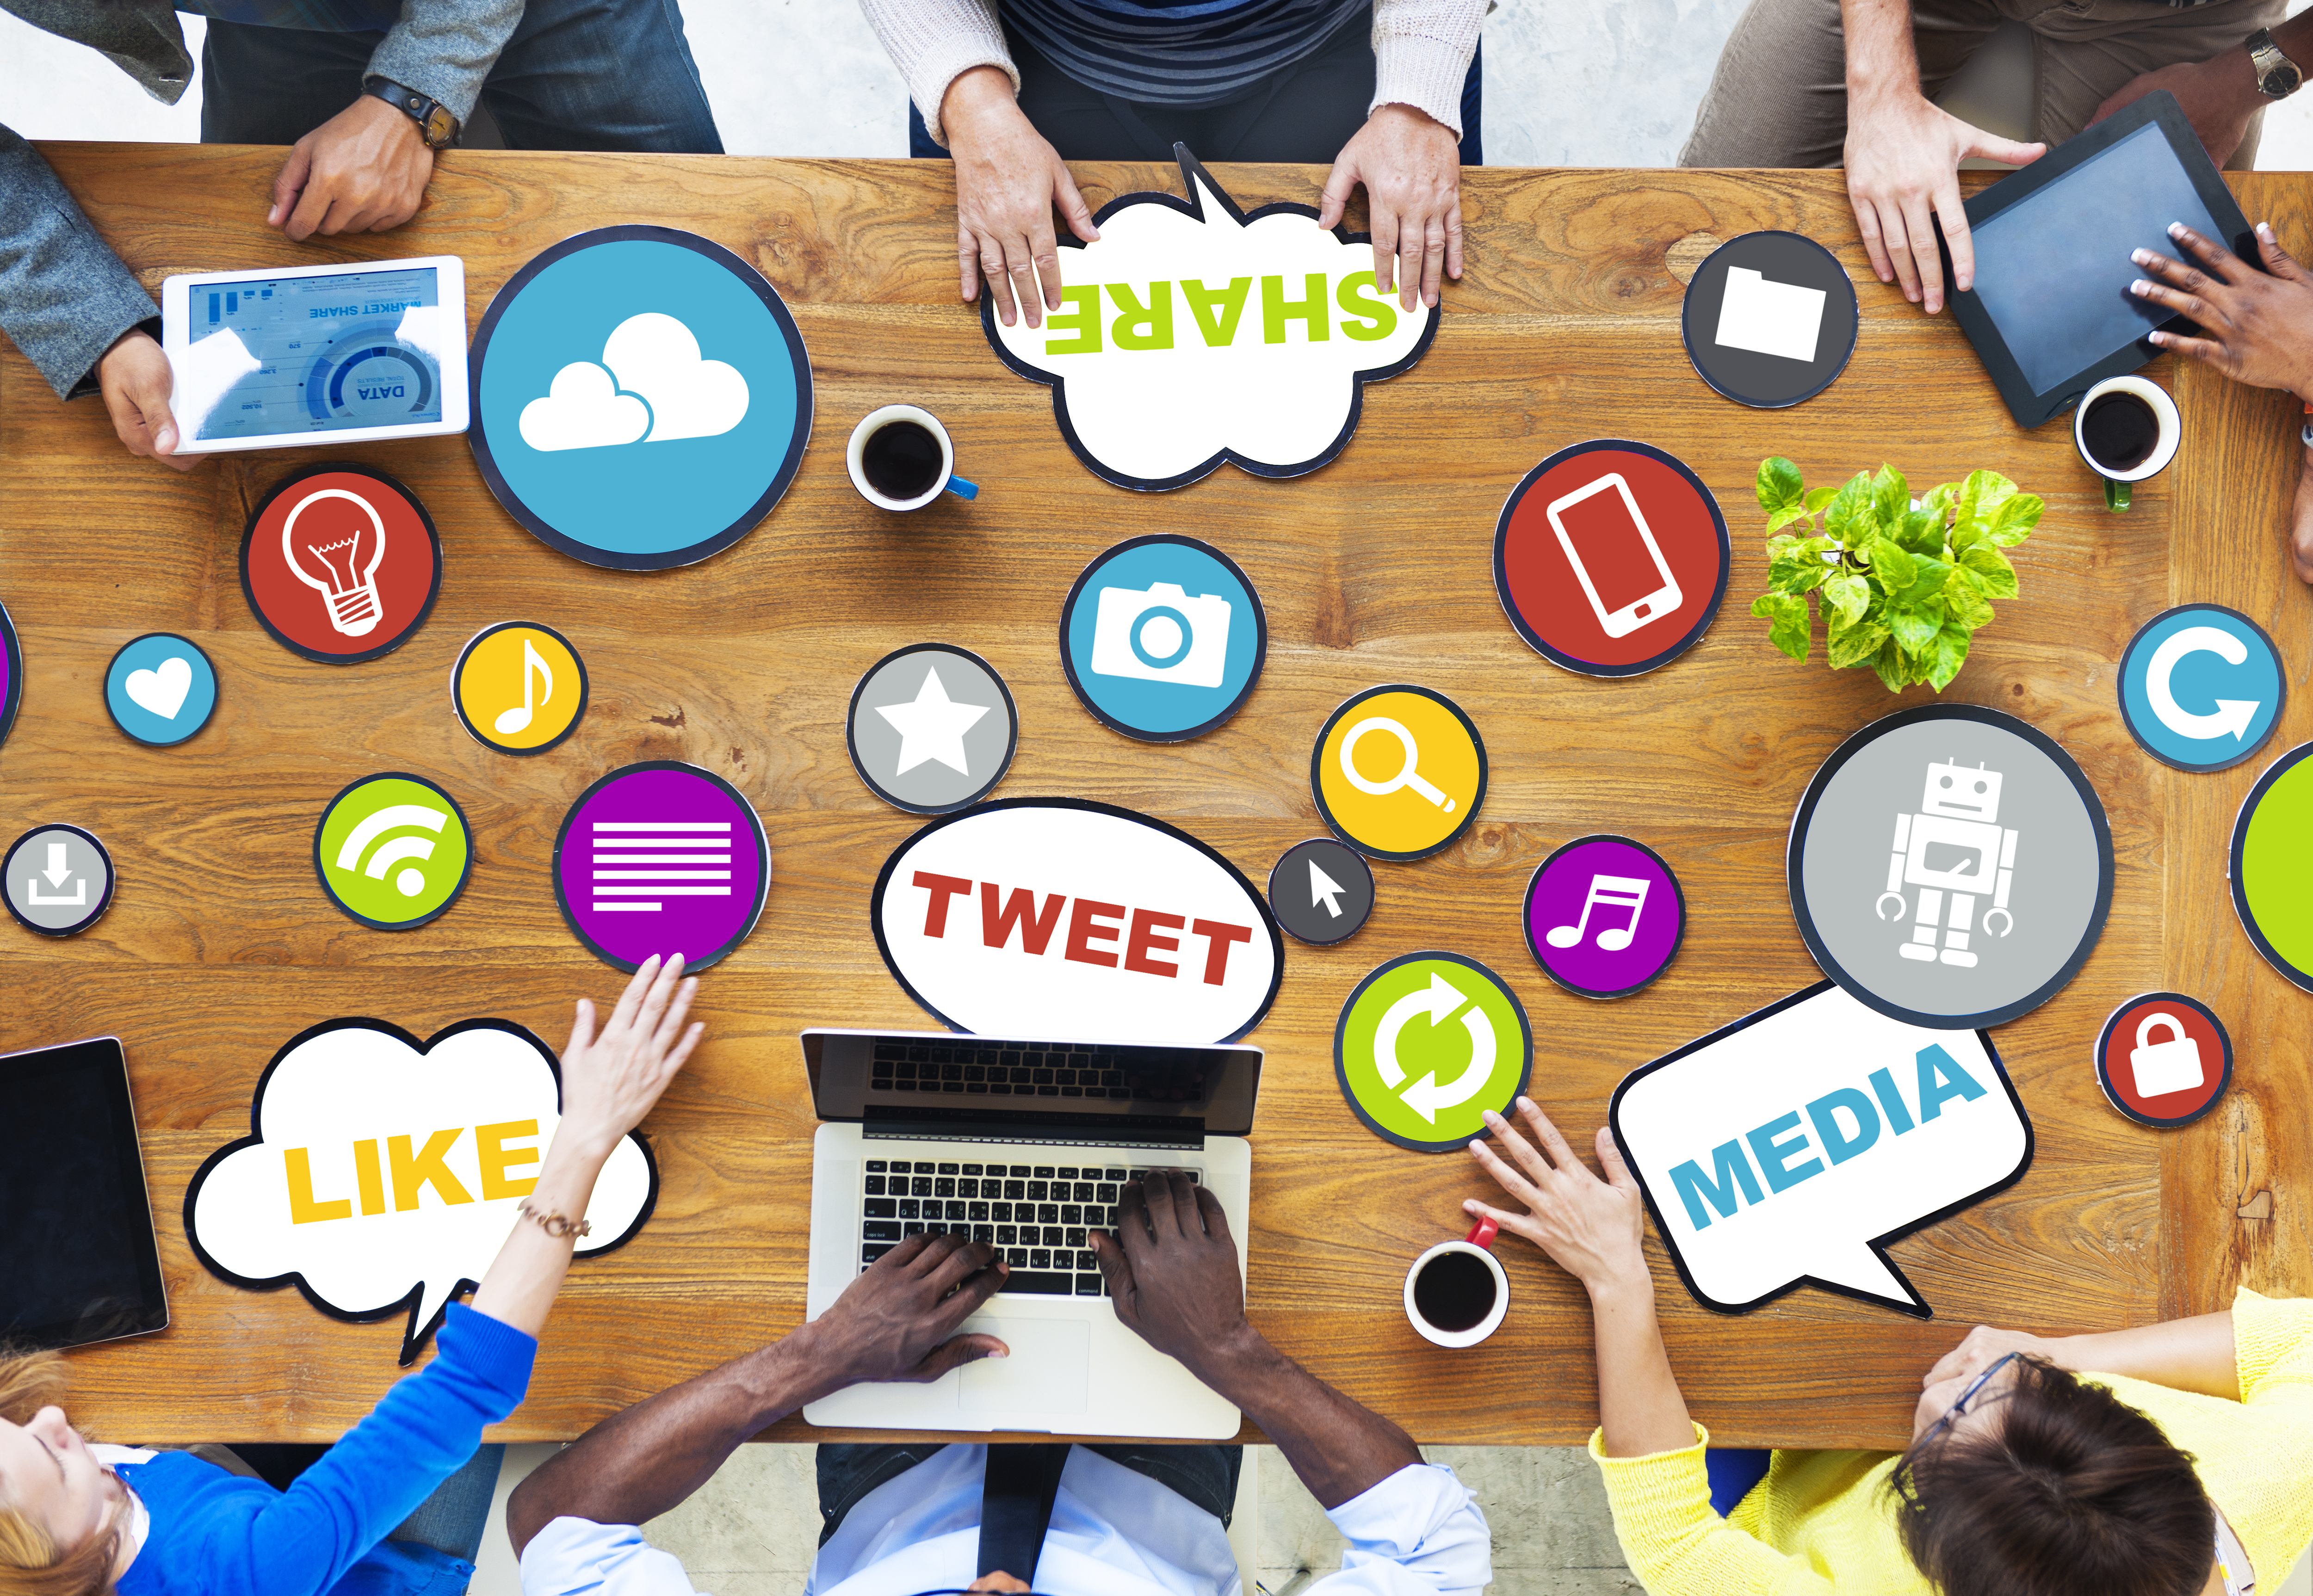 social media marketing; a generic image of a group of people discussing about social media - lots of social media related icons and images are displayed on the table like share, tweet, media, like...